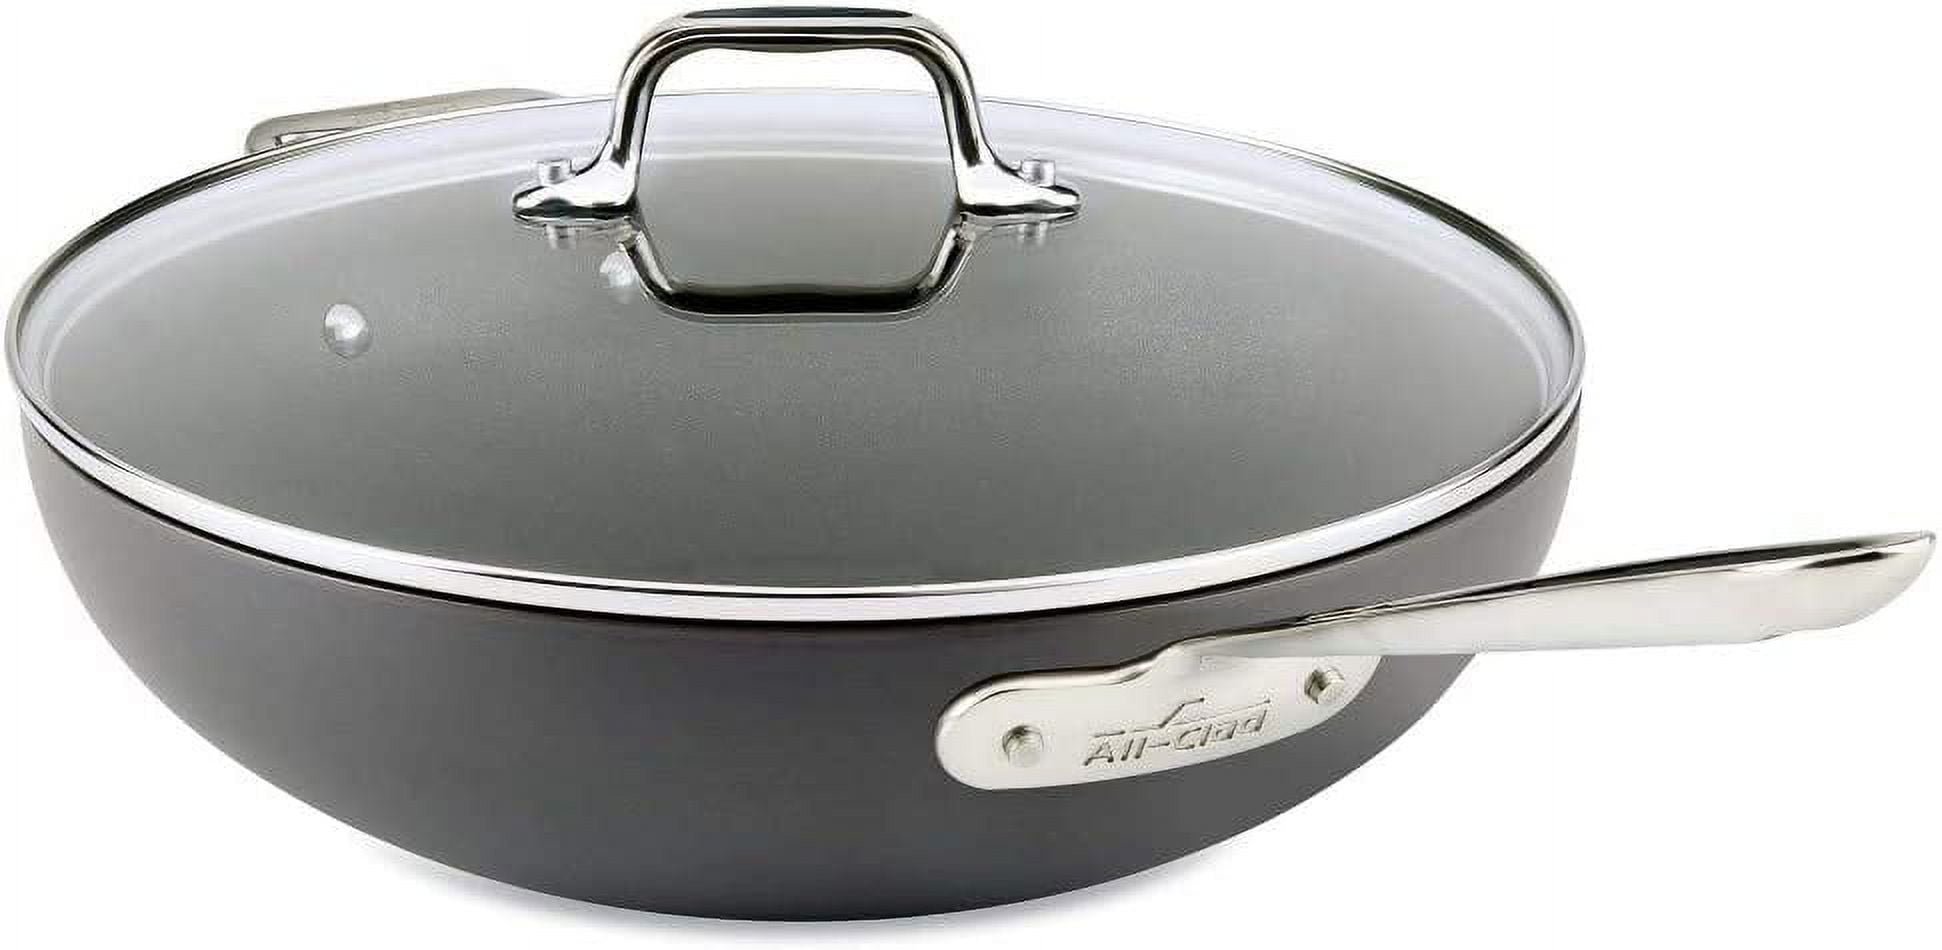 All-Clad HA1 Hard Anodized Nonstick Saute Pan Cookware, 4-Quart, Black &  E1002S63 HA1 Hard Anodized Nonstick Fry Pan Cookware Set, 10 Inch and 12  Inch